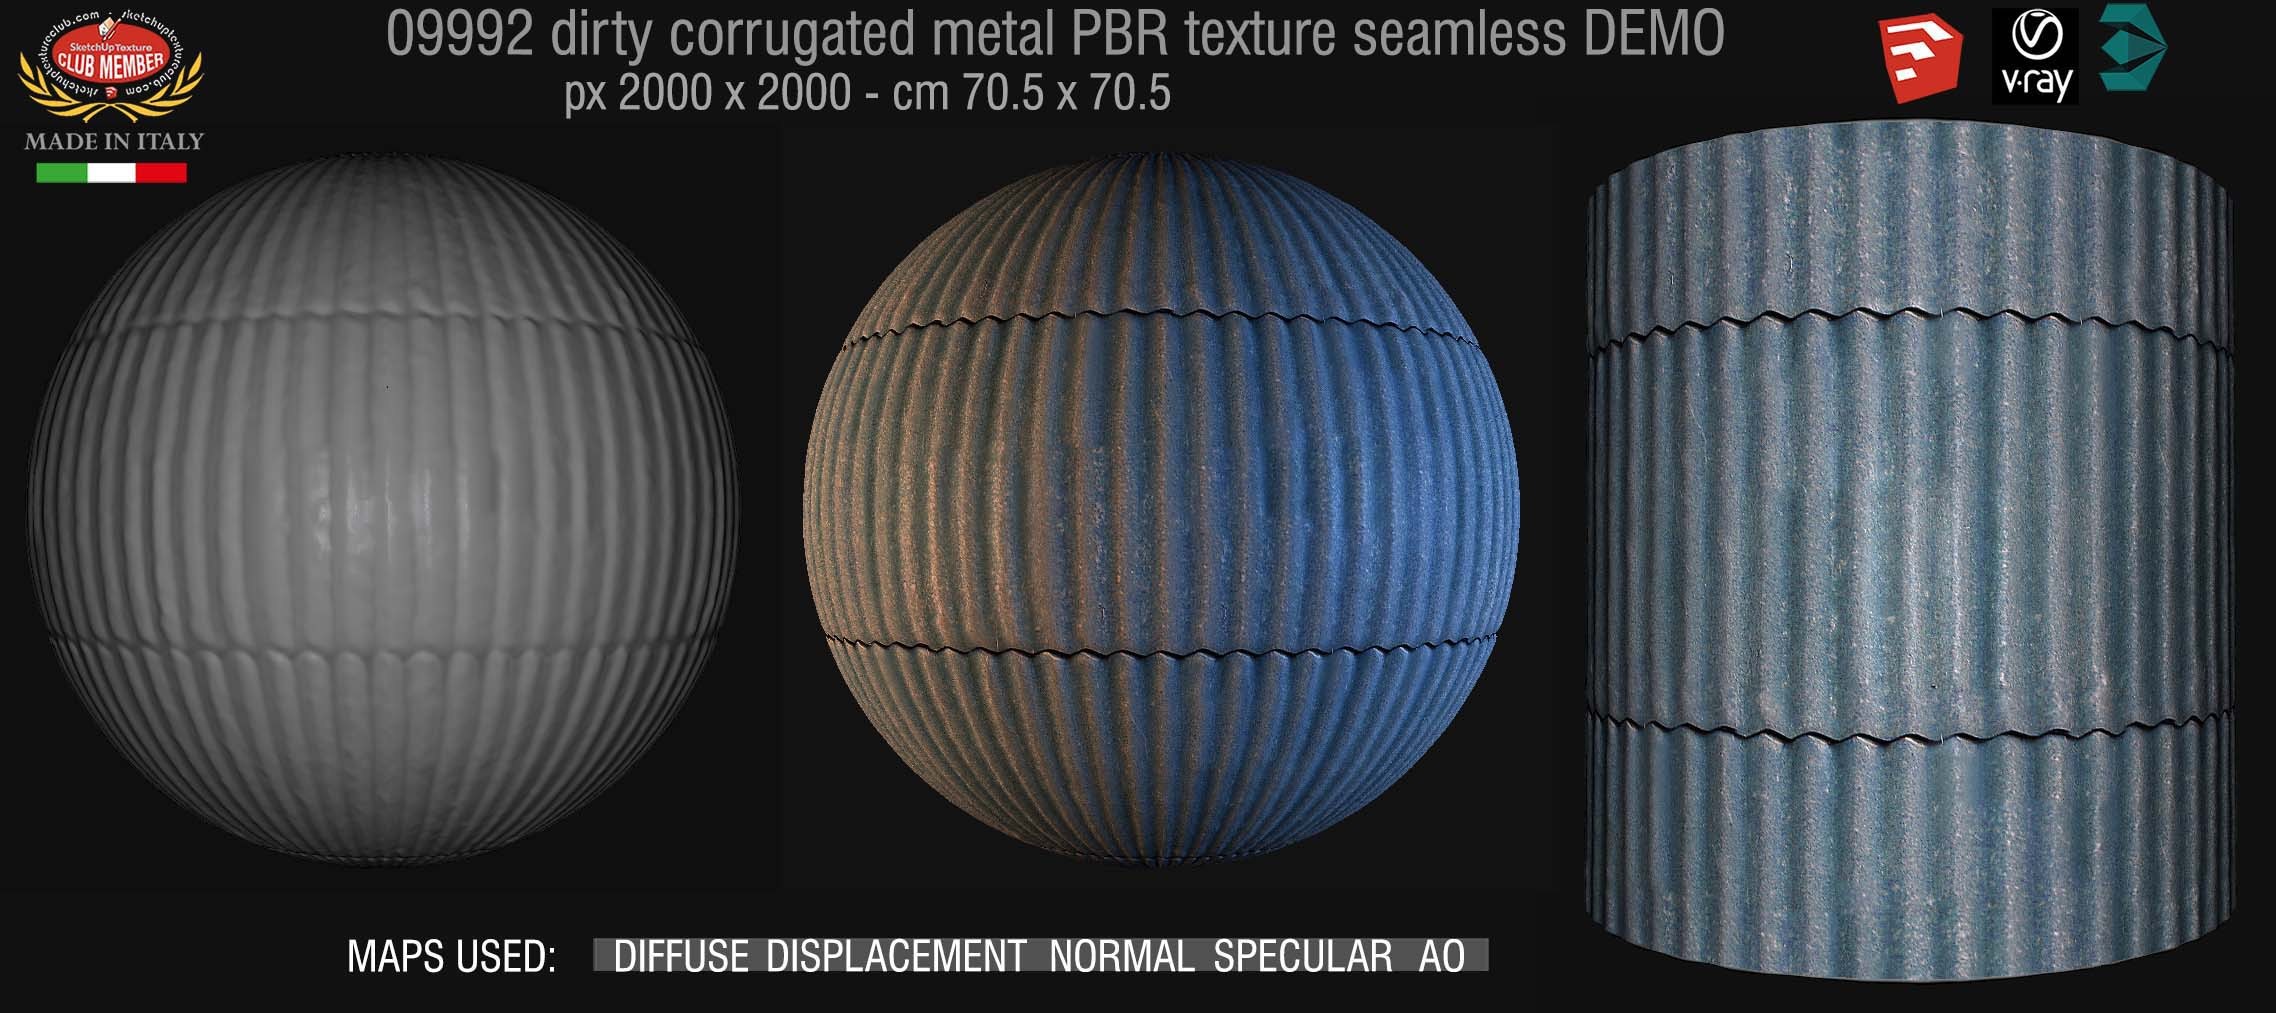 09992 Dirty corrugated metal PBR texture seamless DEMO